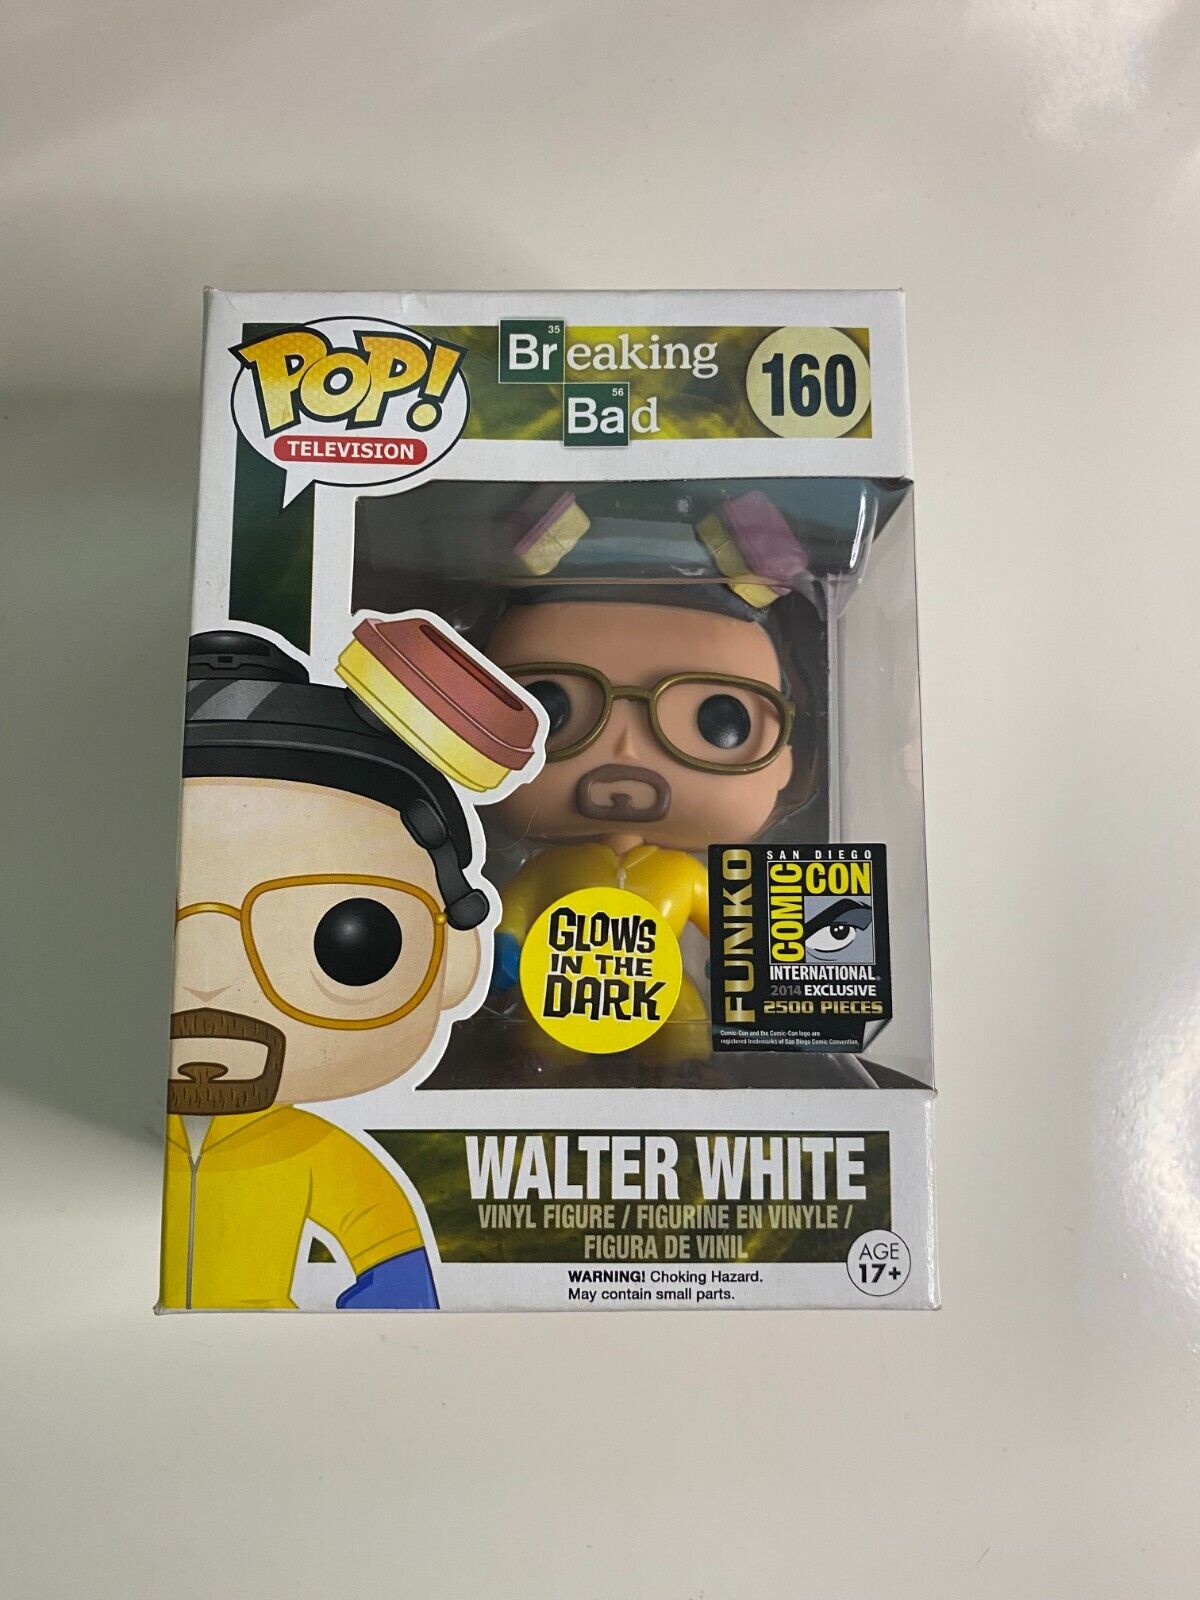 Walter White Breaking Bad Funko Pop #160 SDCC 2014 Exclusive Glows in the Dark